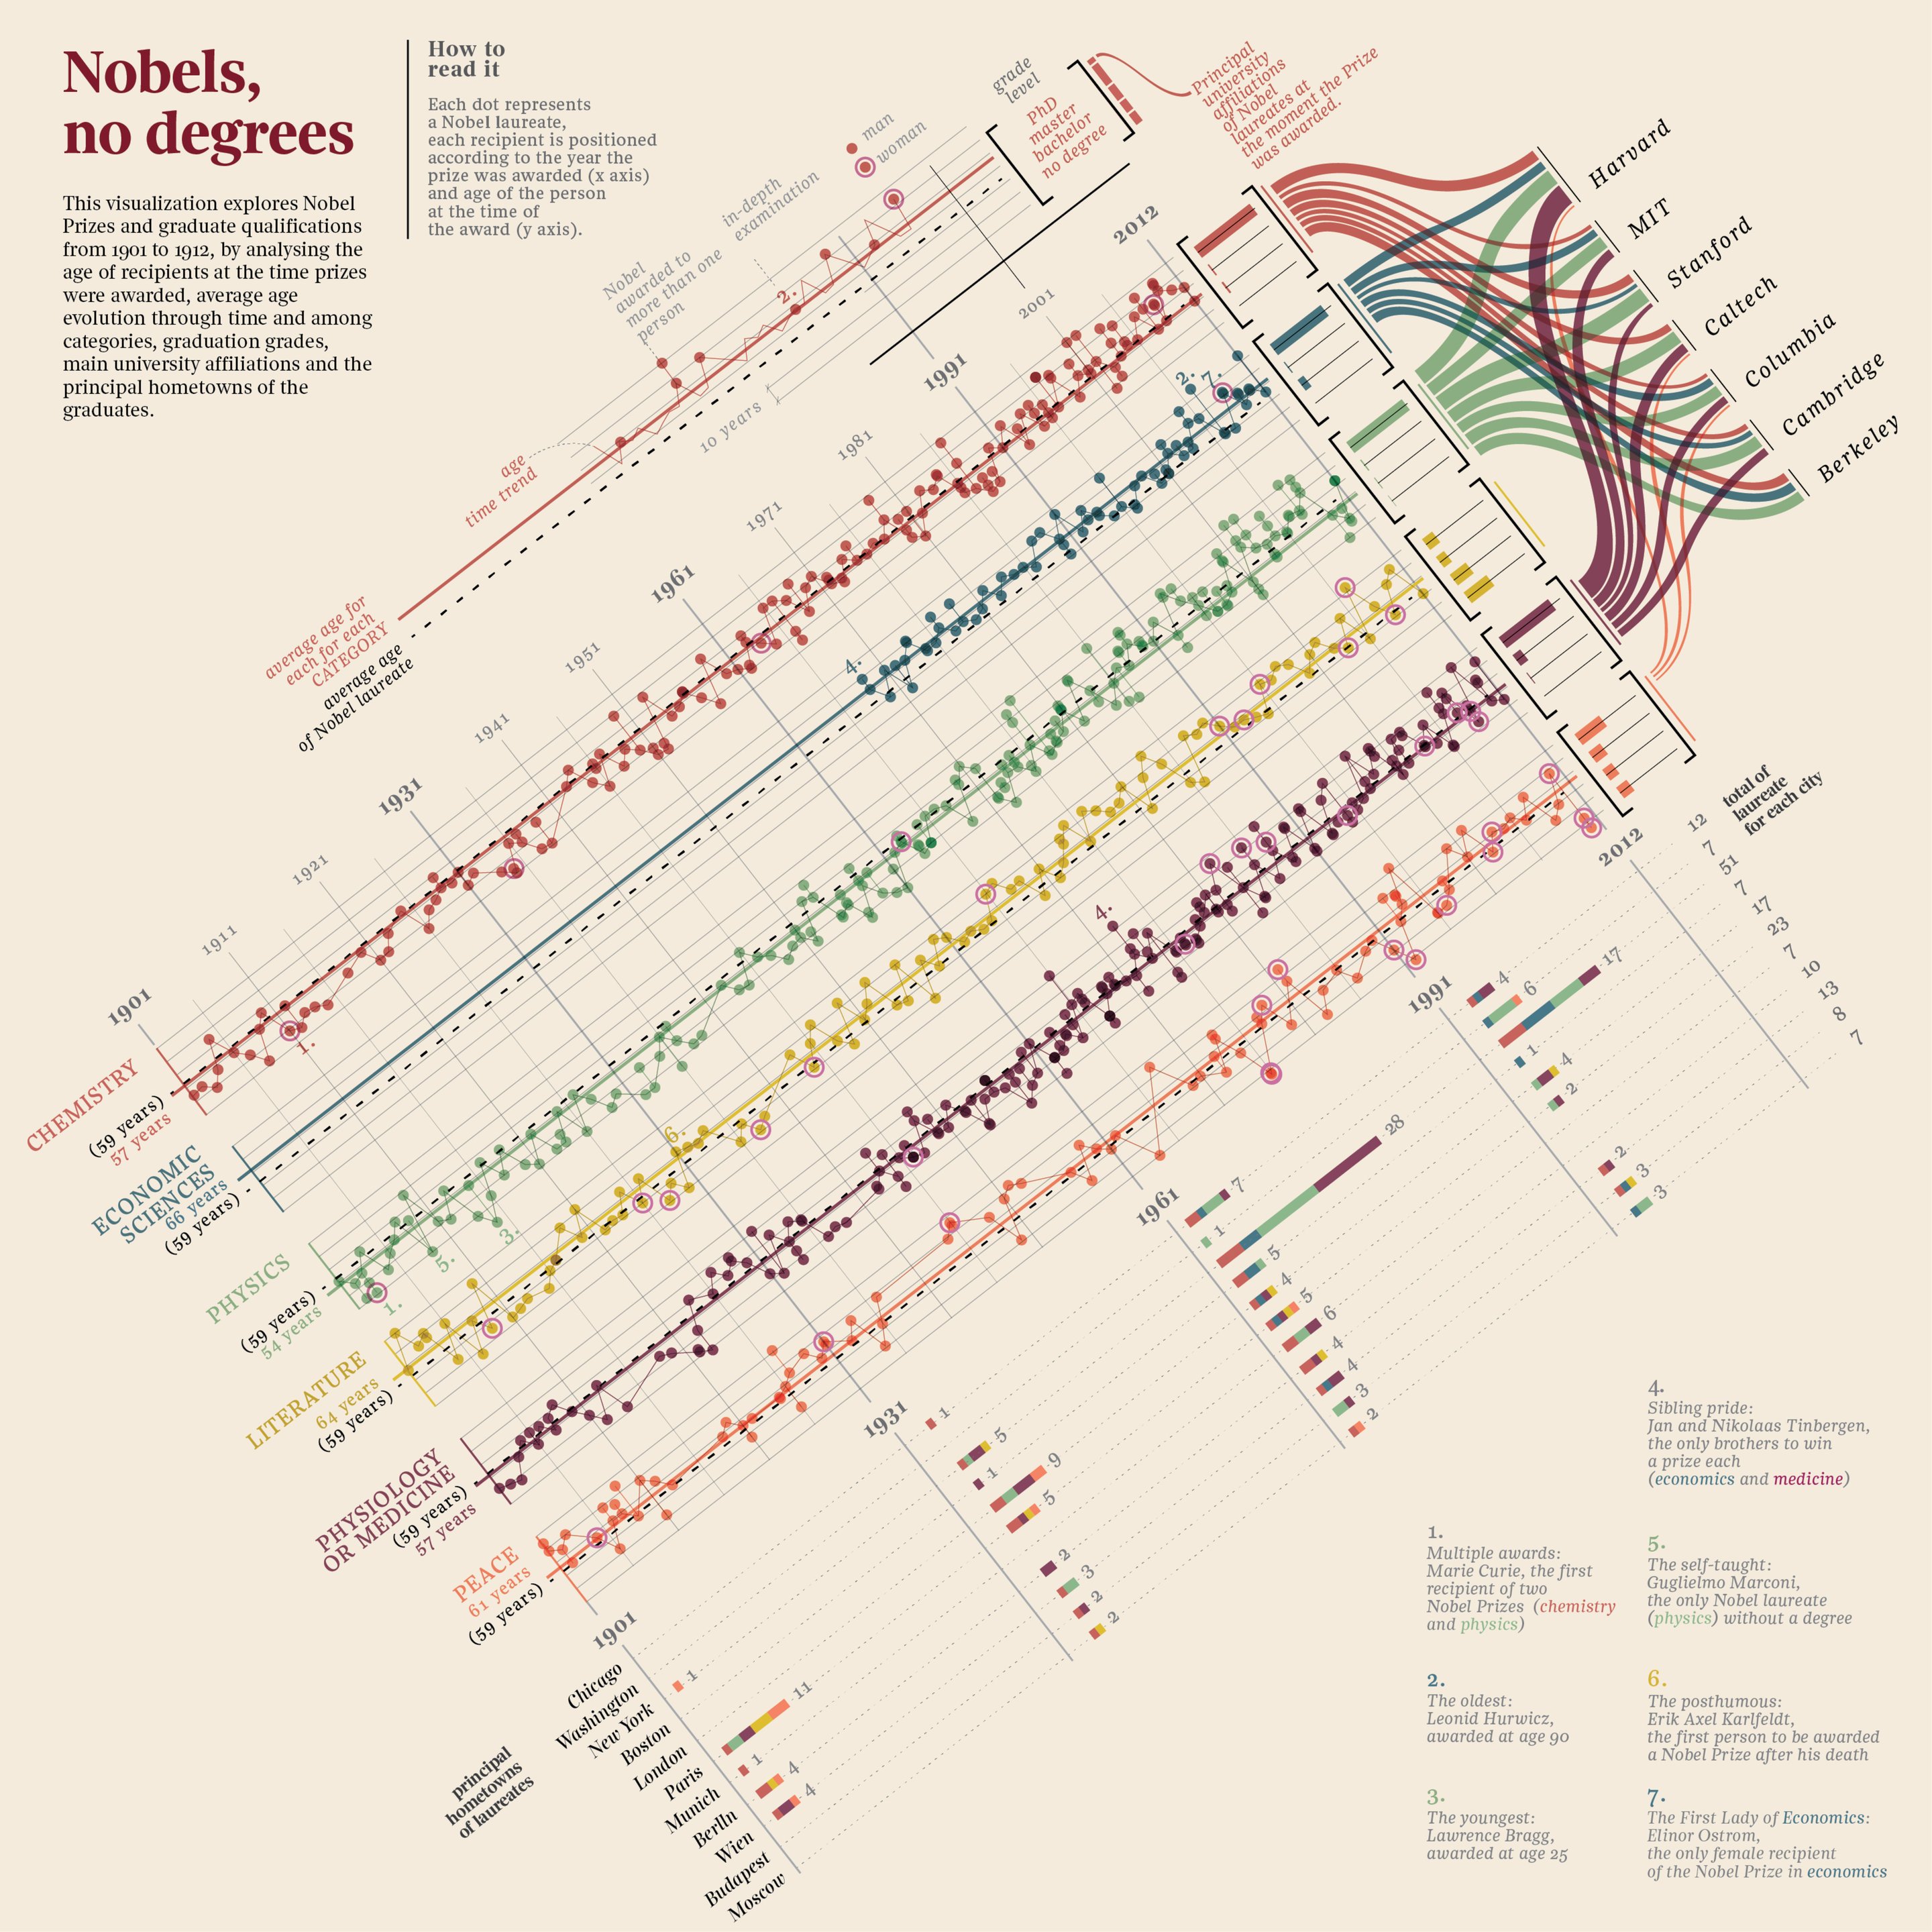 A combination sankey bar chart shows the location of nobel winners hometowns and university